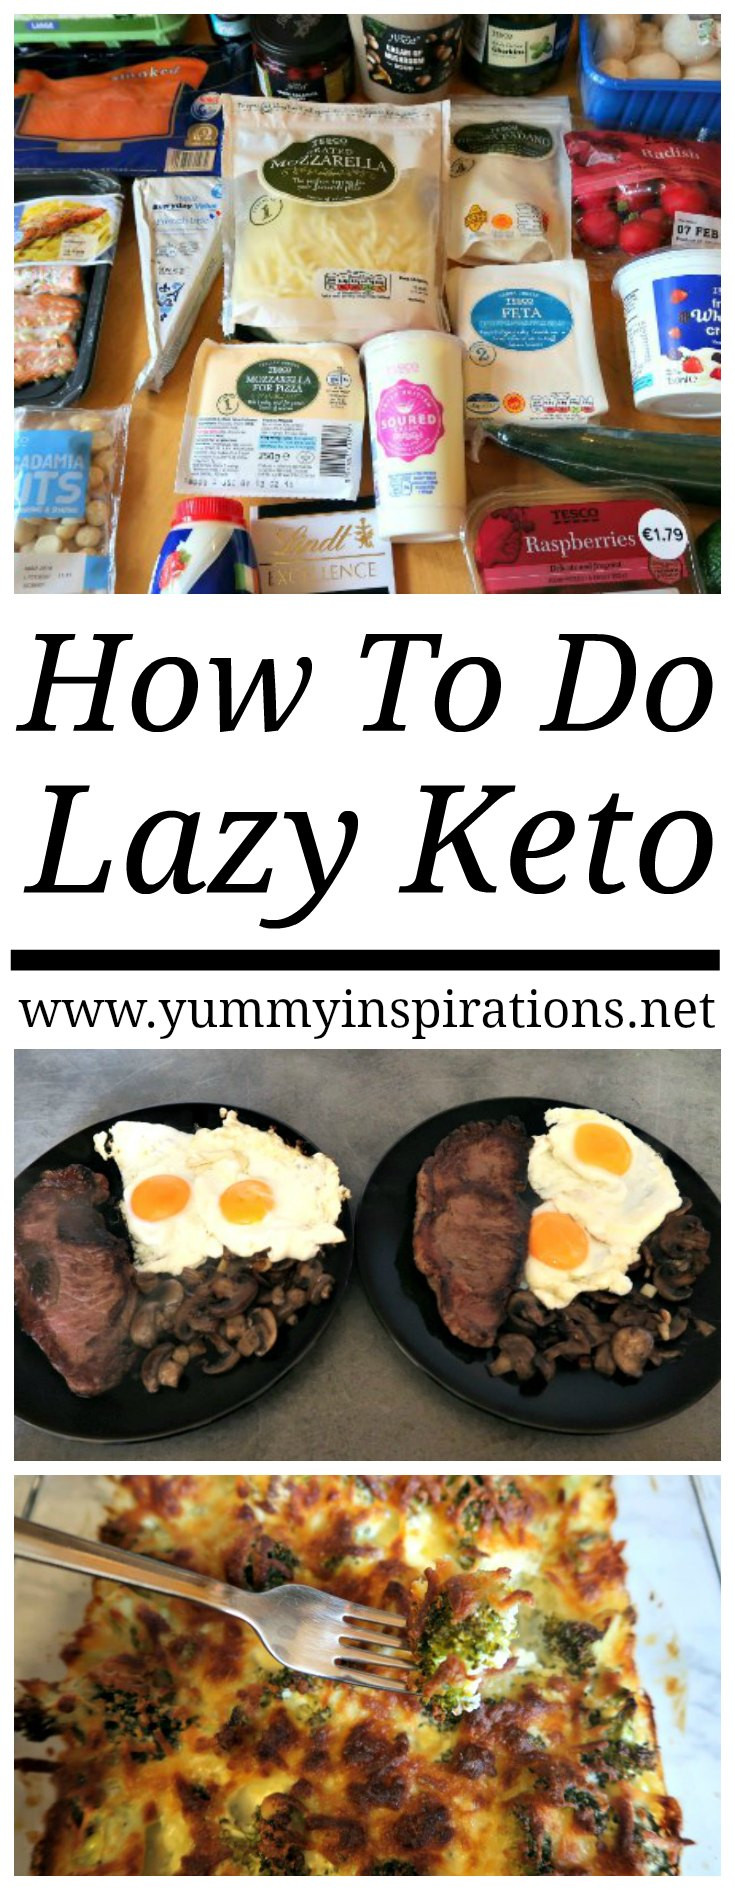 Lazy Keto For Beginners
 How To Do Lazy Keto What is Lazy Keto Cooking Lazy Keto